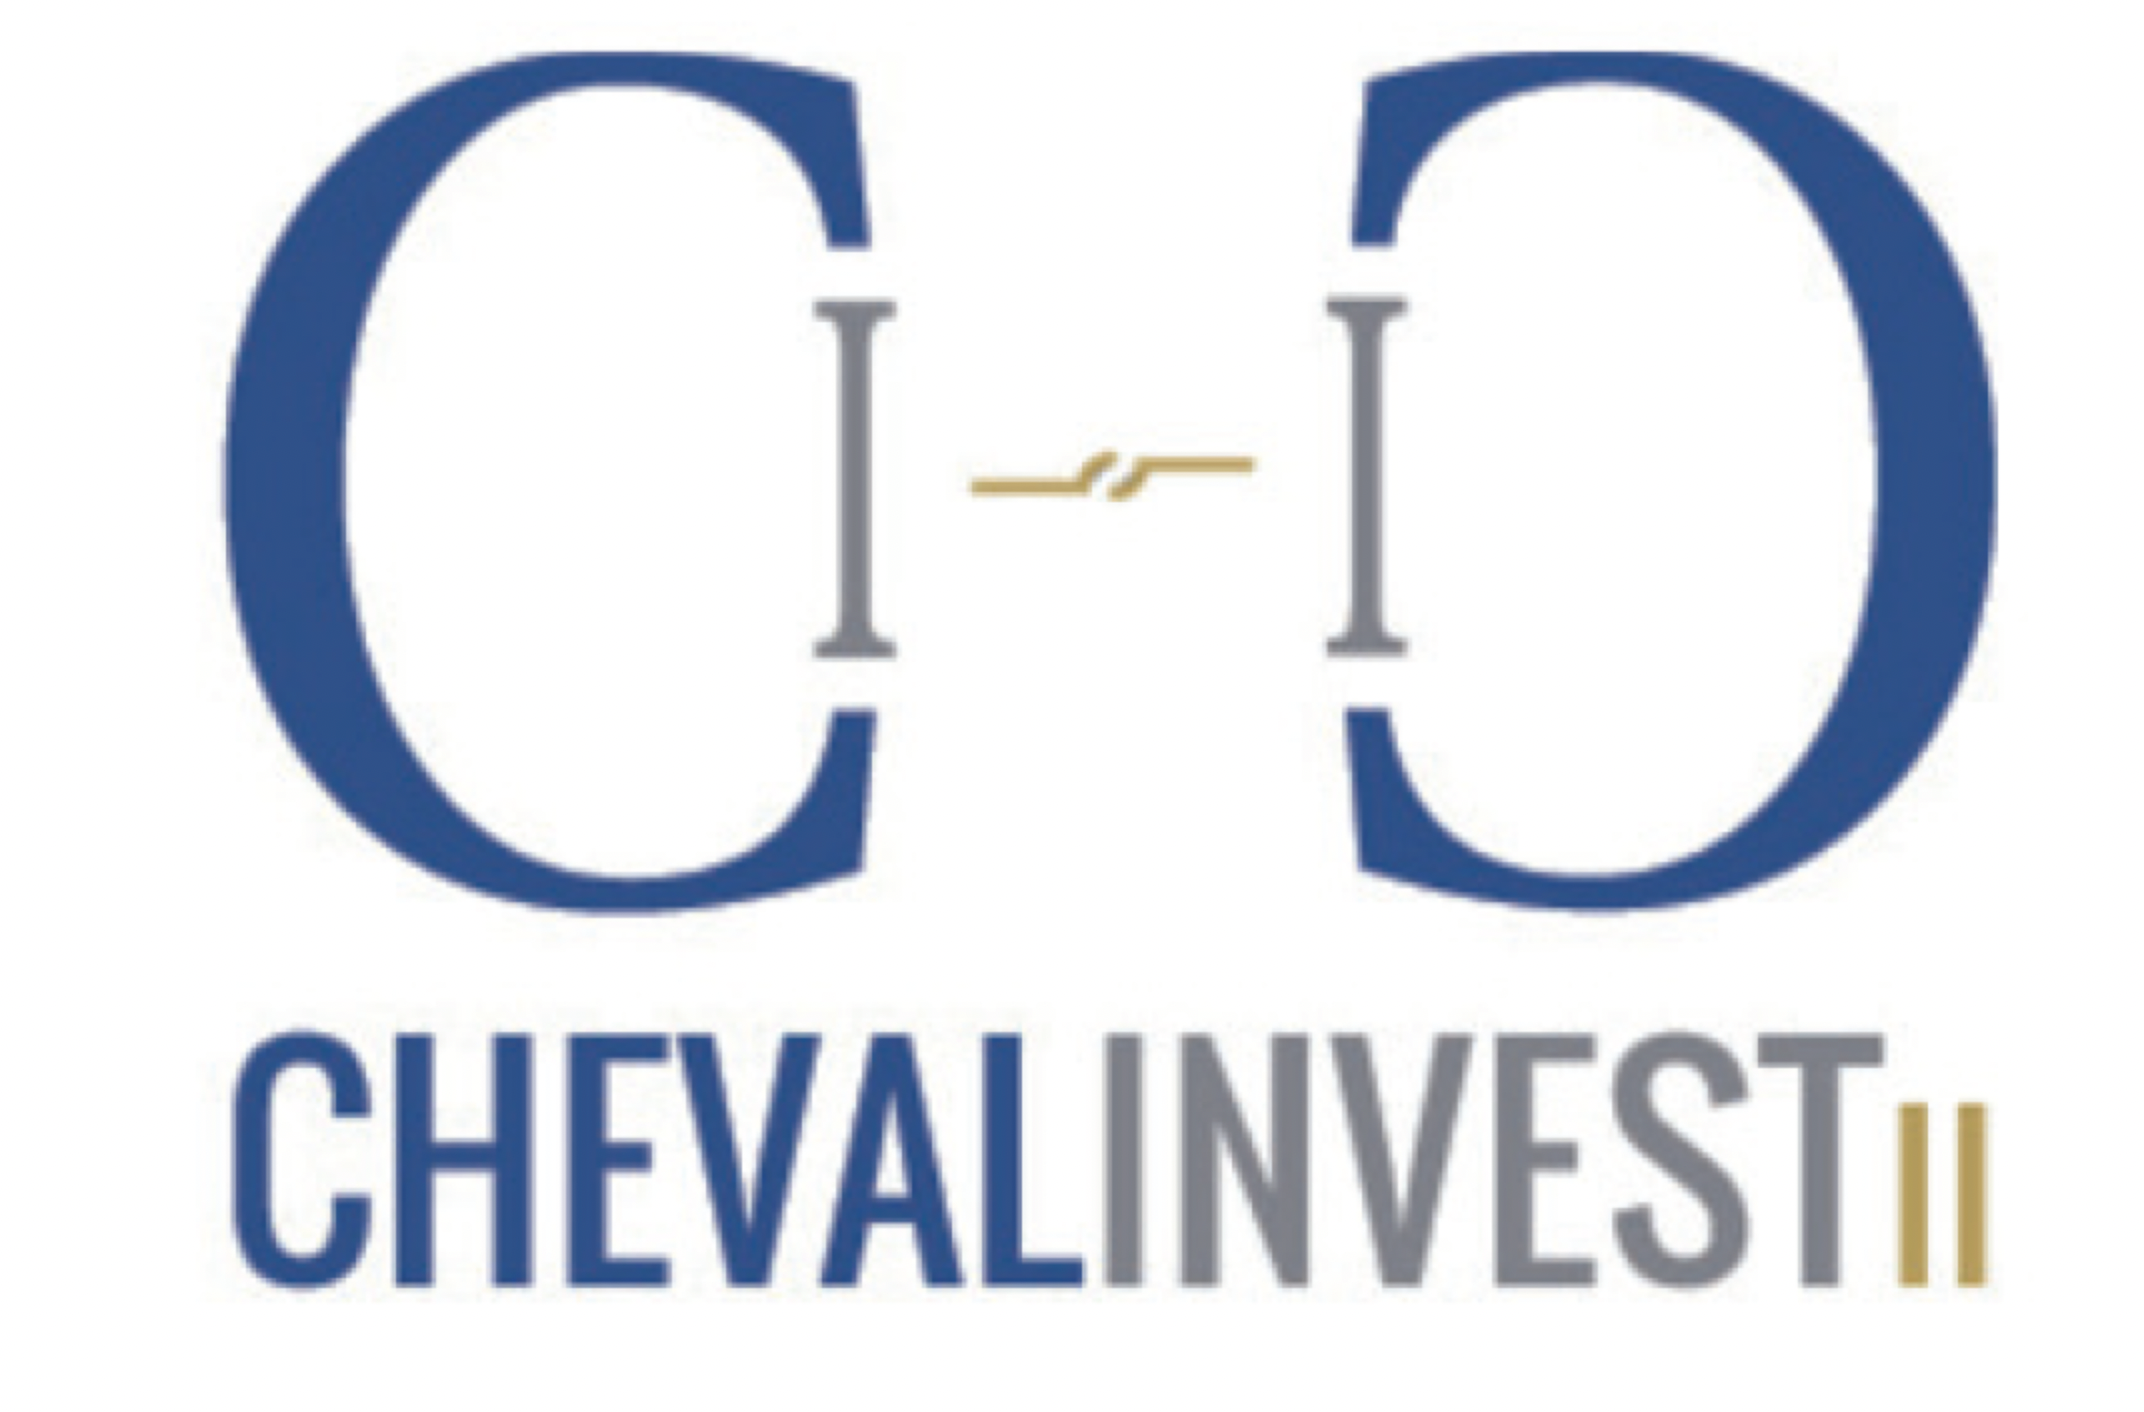 Cheval Invest II